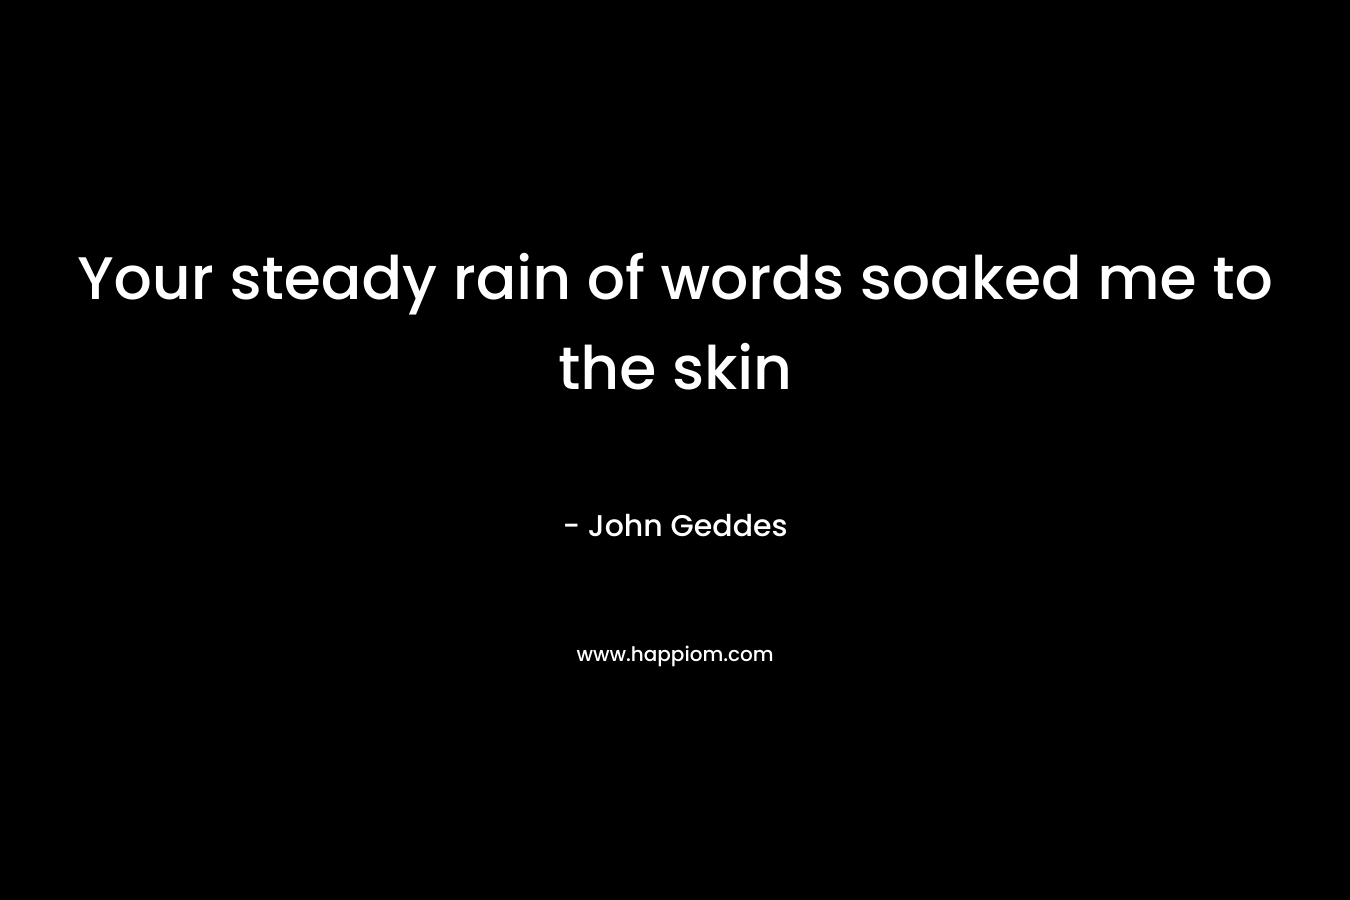 Your steady rain of words soaked me to the skin